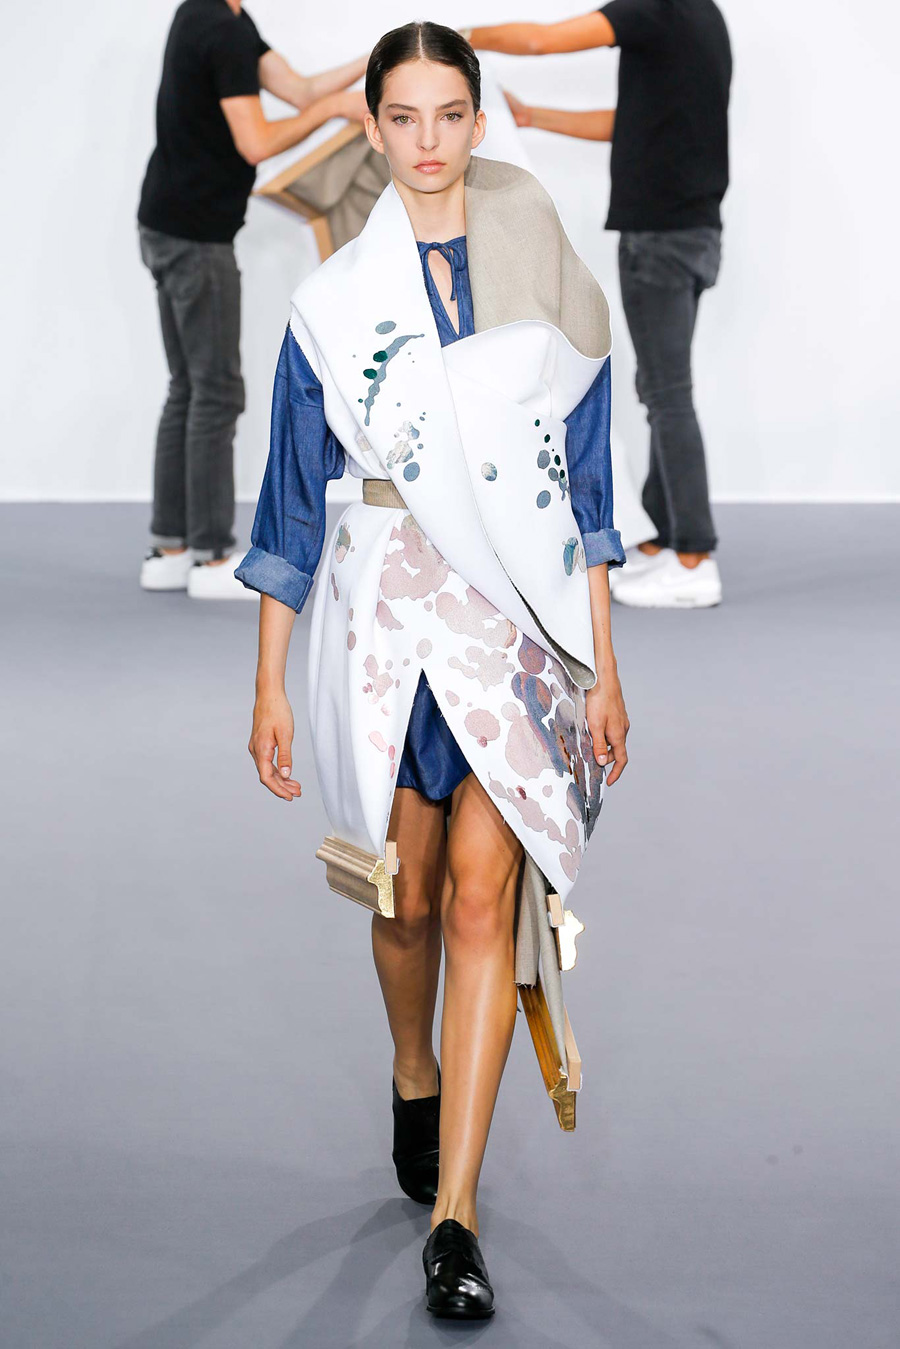 wearable object in fashion one more good one viktor rolf show 2015 canvas dress